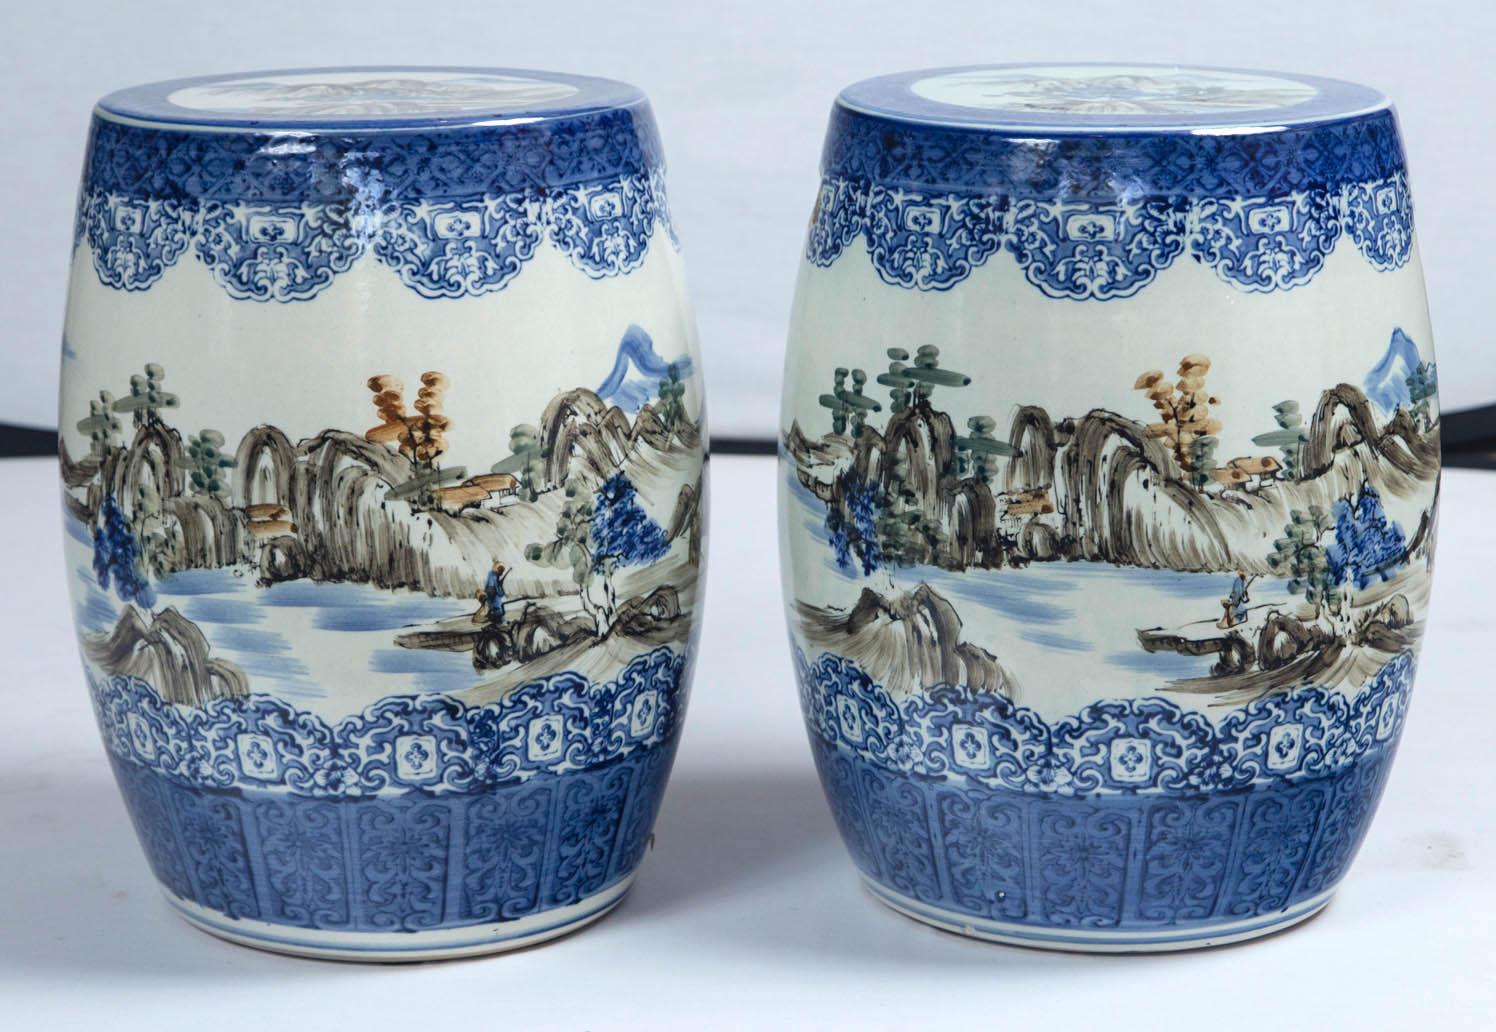 Pair of Japanese ceramic garden stools, early 20th century. Cobalt blue glaze design border at top and bottom. Overall rural landscape with mountains and lake. Design reminiscent of Japanese watercolor paintings.